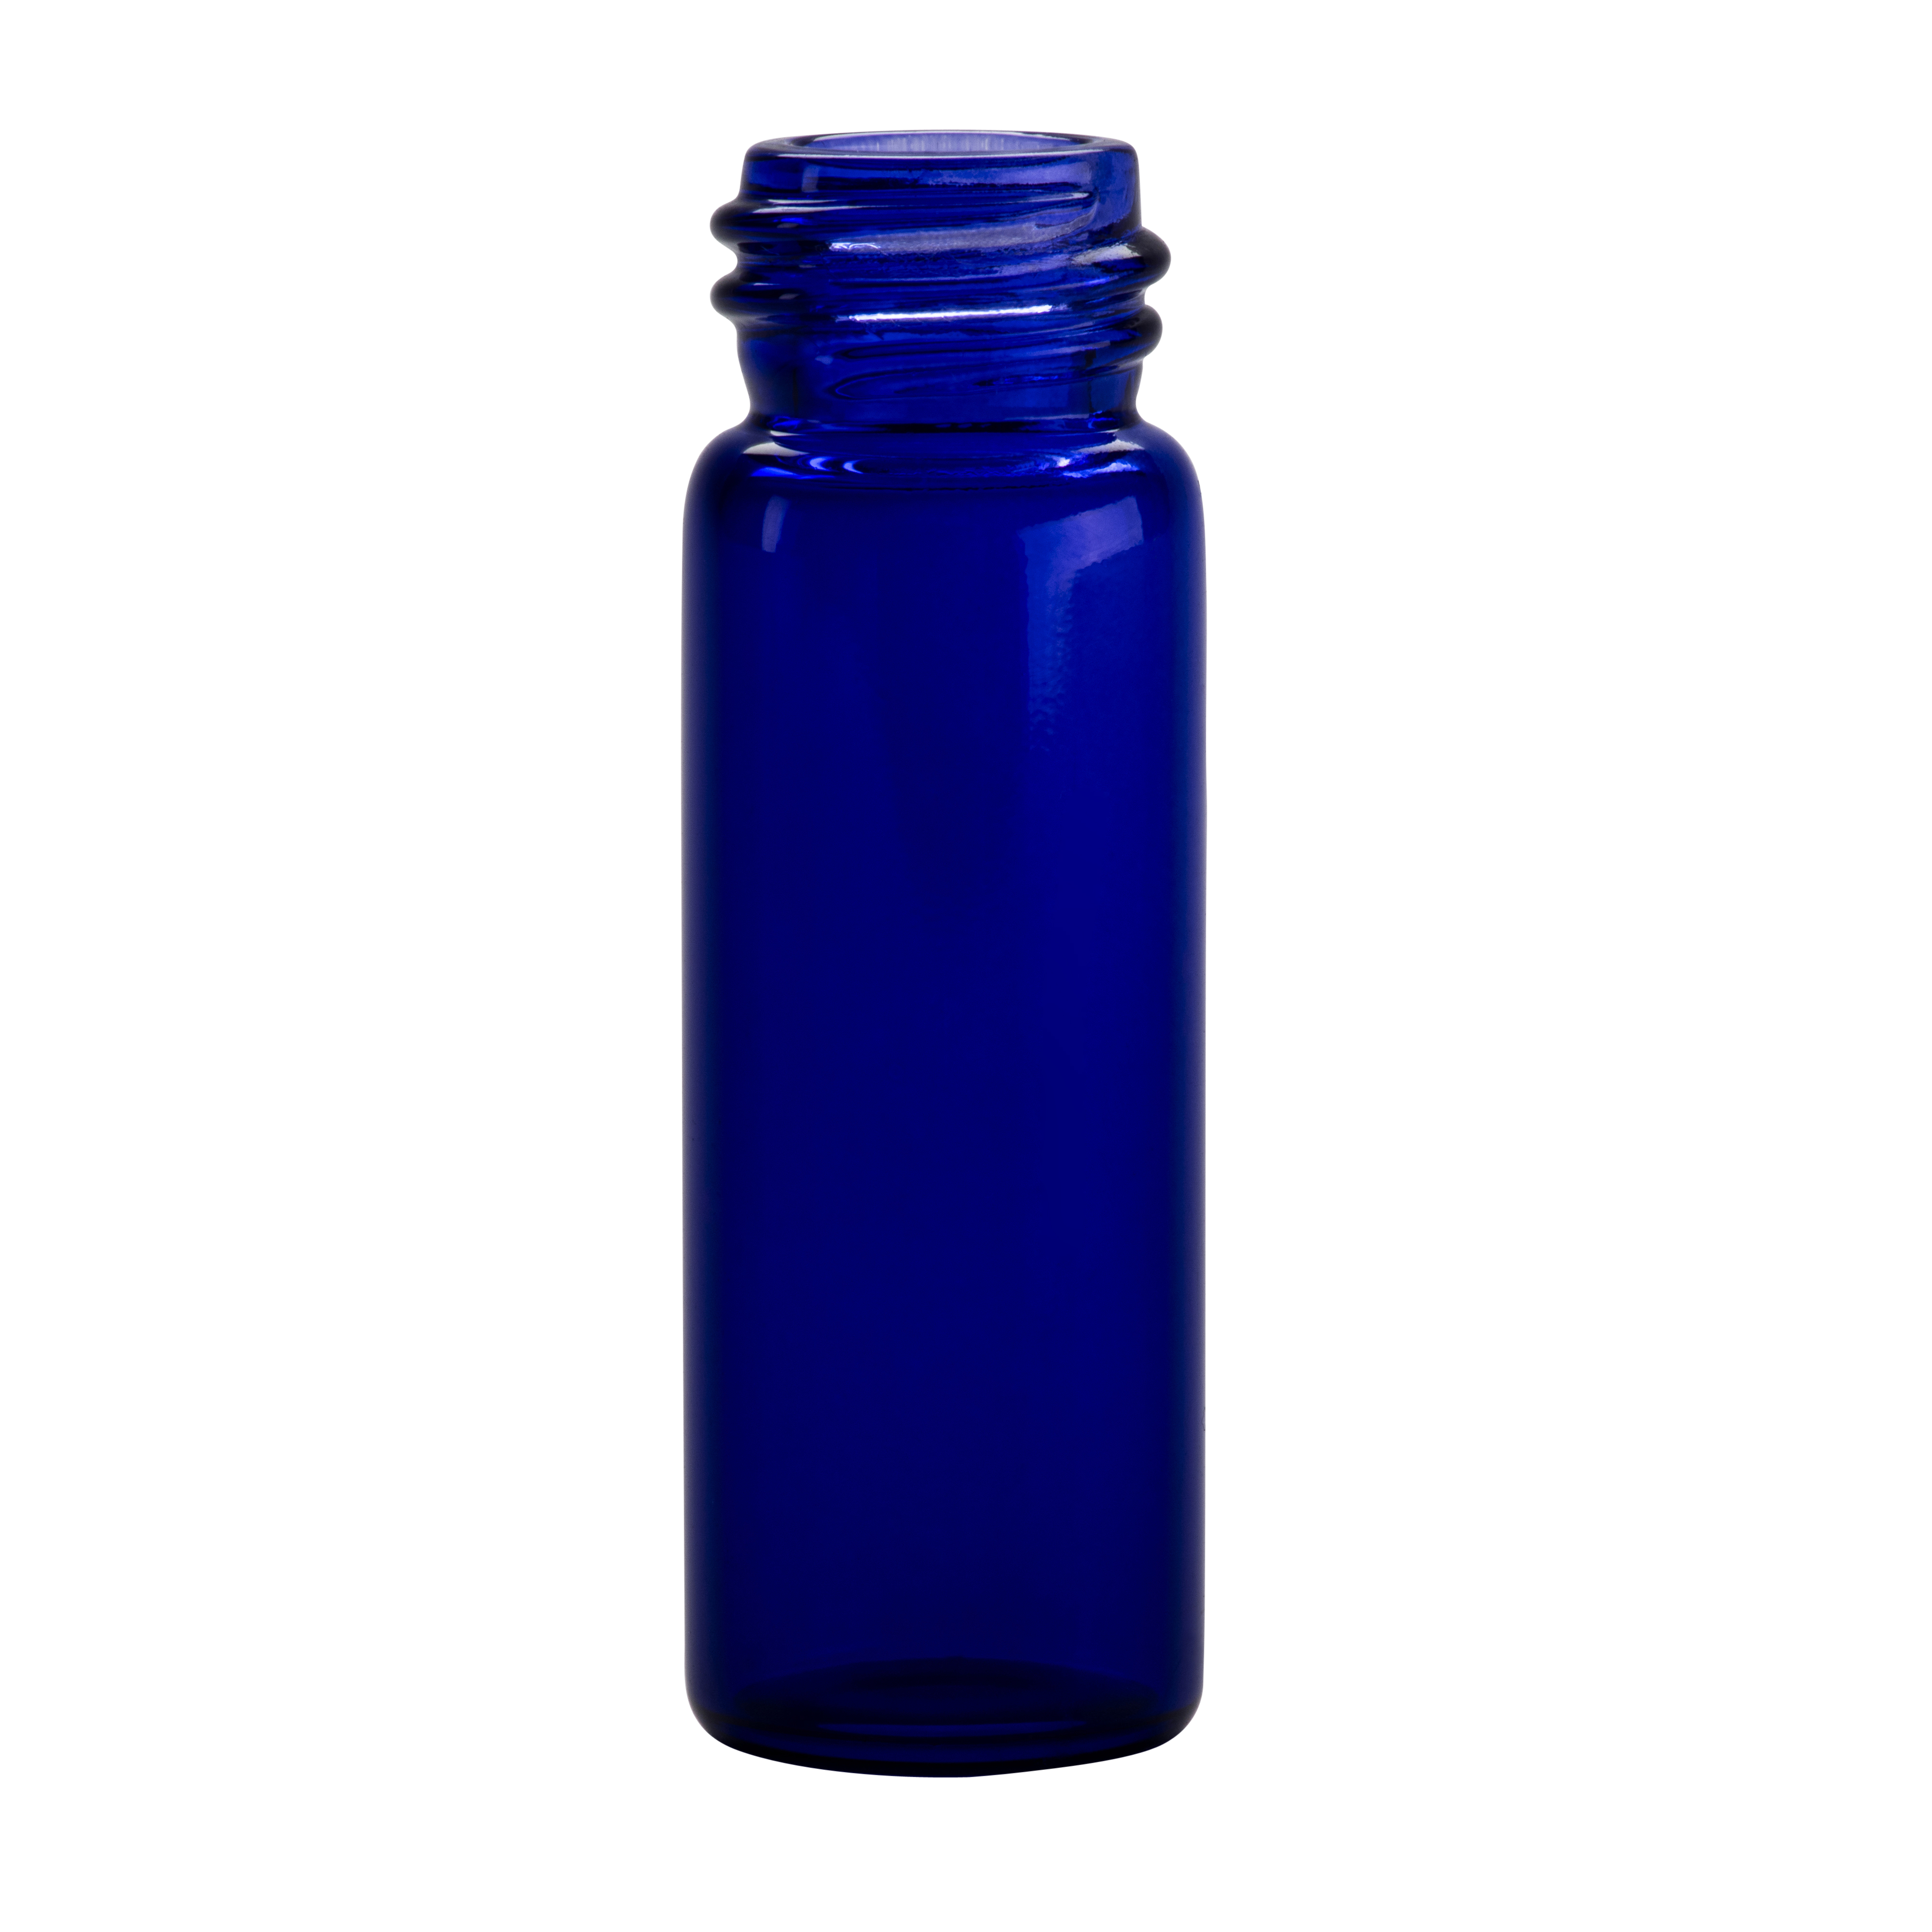 Blue bottle container